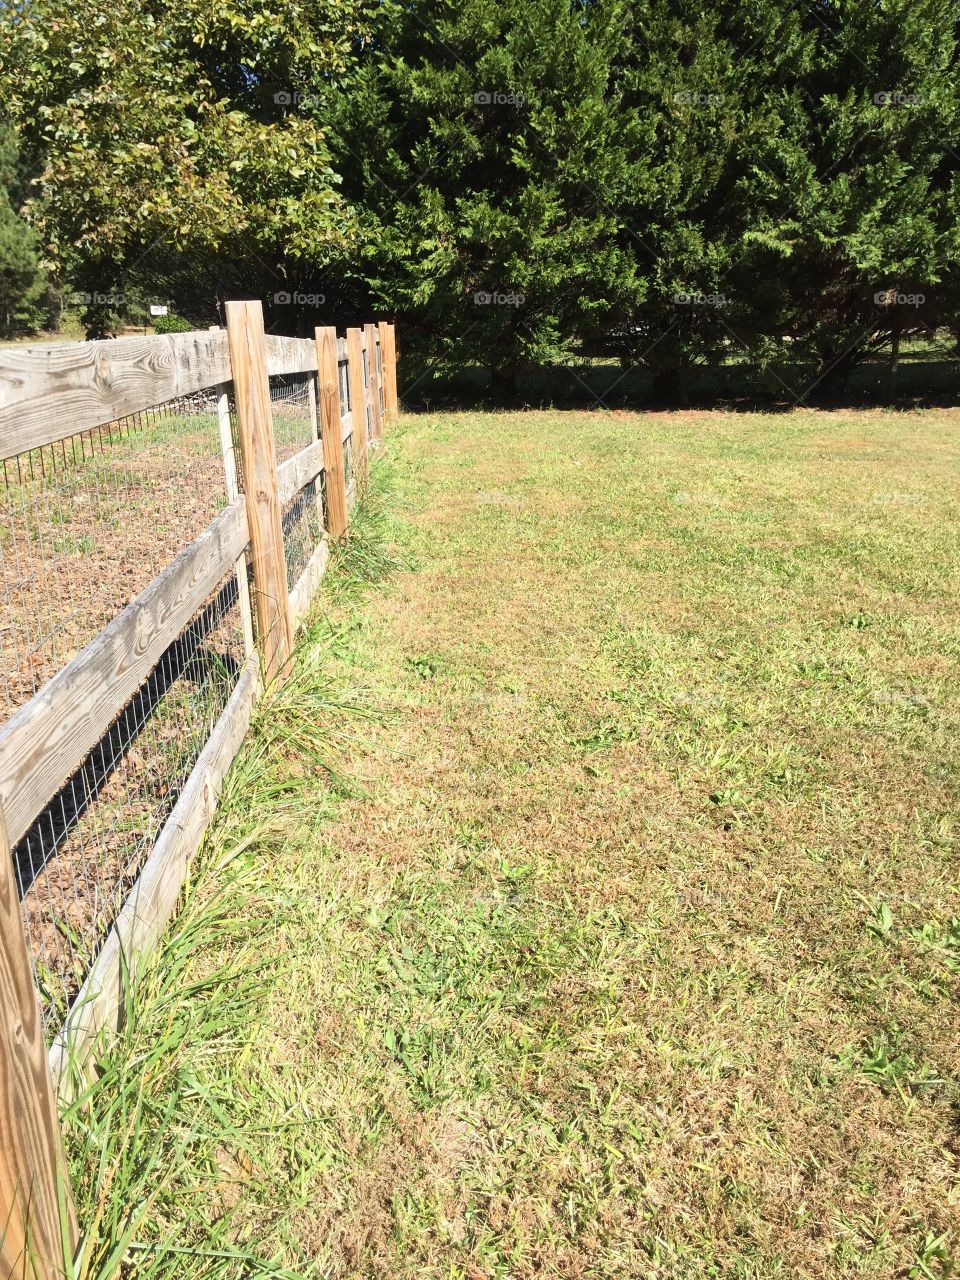 Nice three rail fence outlines this country yard providing both safety and boundaries.